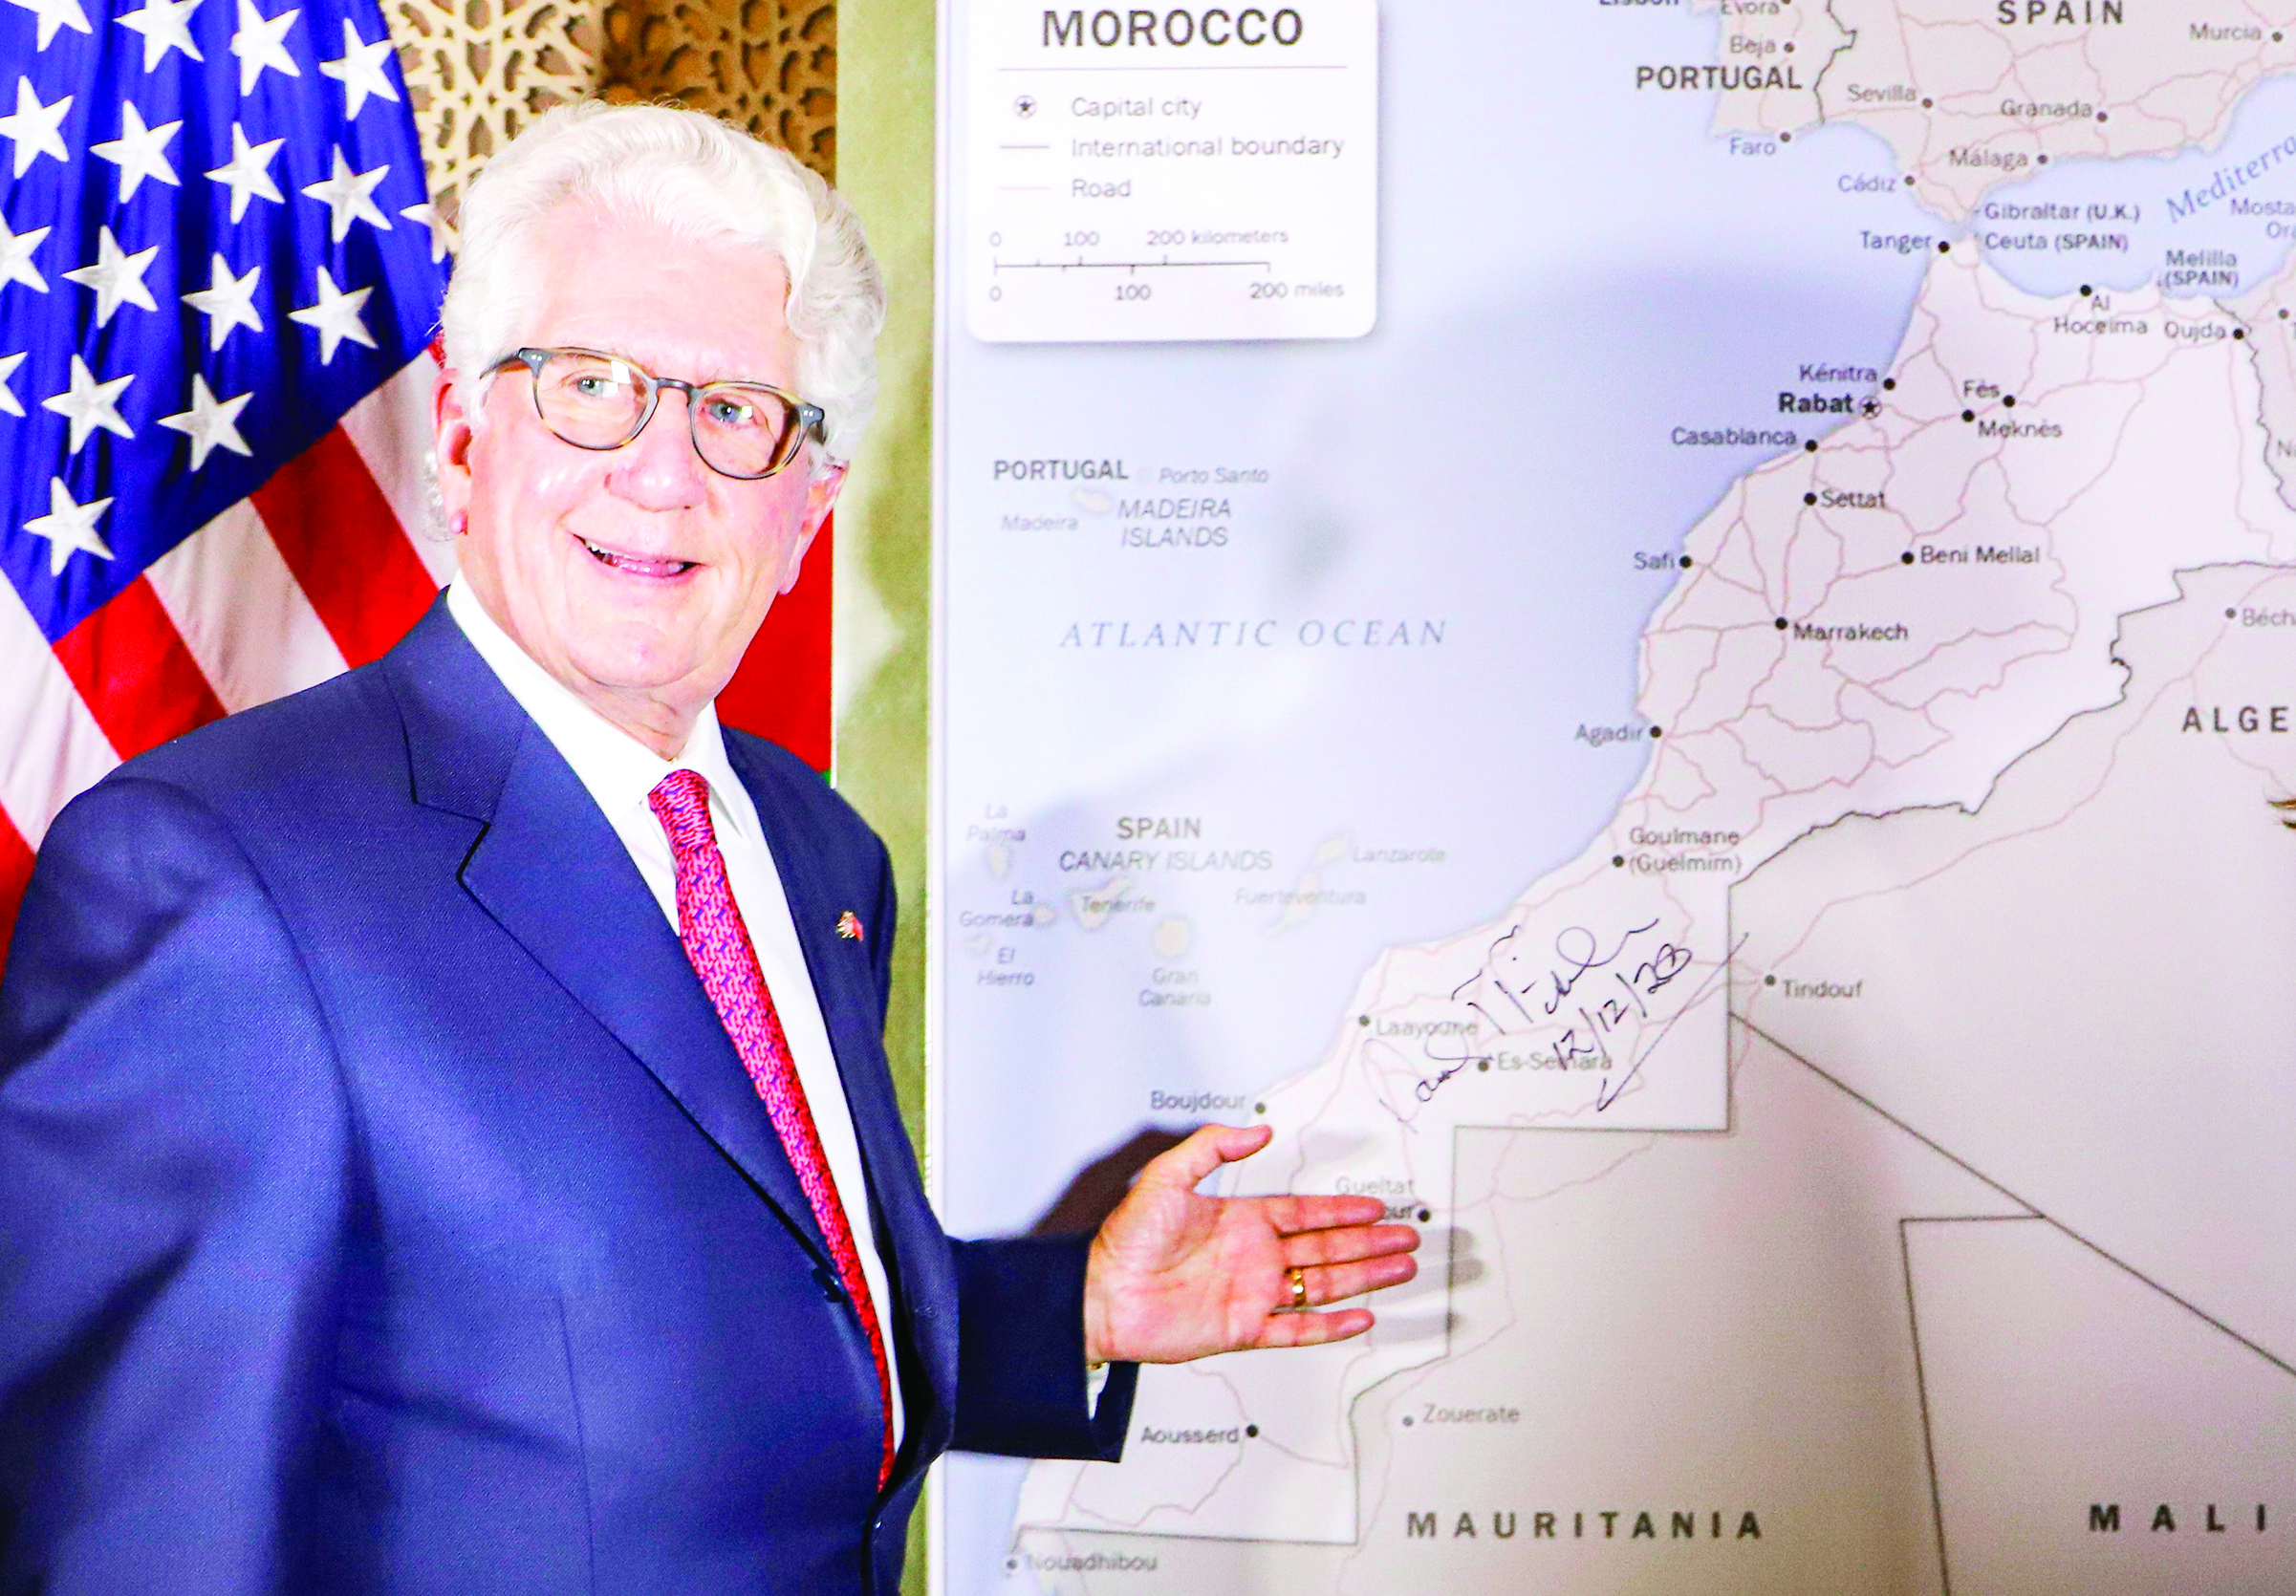 David T. Fischer, US Ambassador to the Kingdom of Morocco, standing before a US State Department-authorised map of Morocco recognising the internationally-disputed territory of the Western Sahara (bearing a signature by Fischer) as a part of the North African kingdom, in Morocco's capital Rabat on December 12, 2020. (Photo by - / AFP)